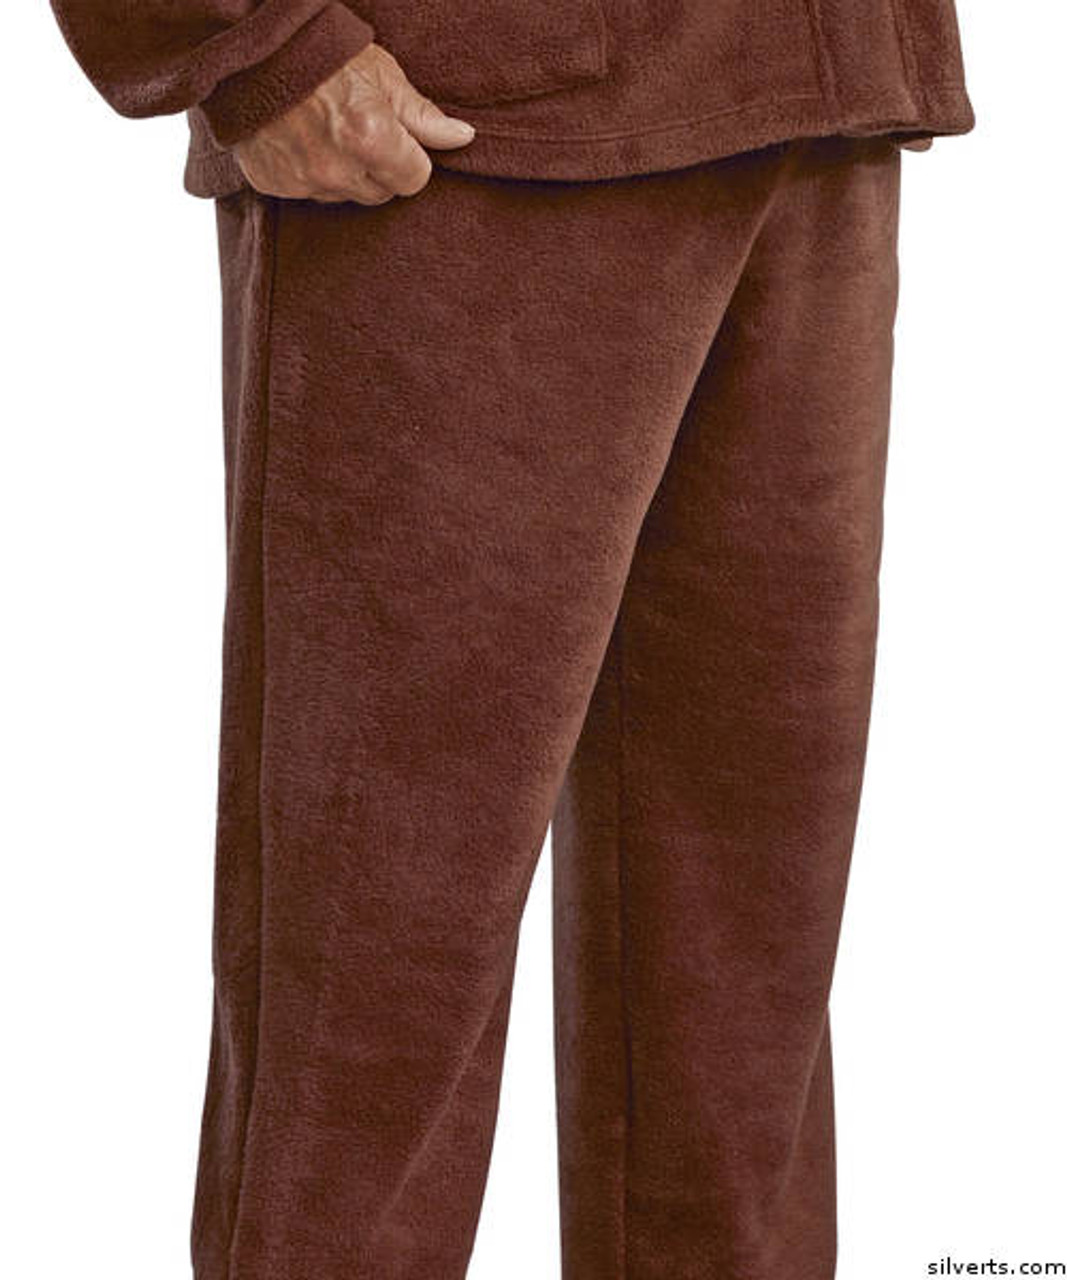 Silvert's 518130504 Mens Polar Fleece Easy Access Track Pants With Easy Access Pants, Size Large, BROWN